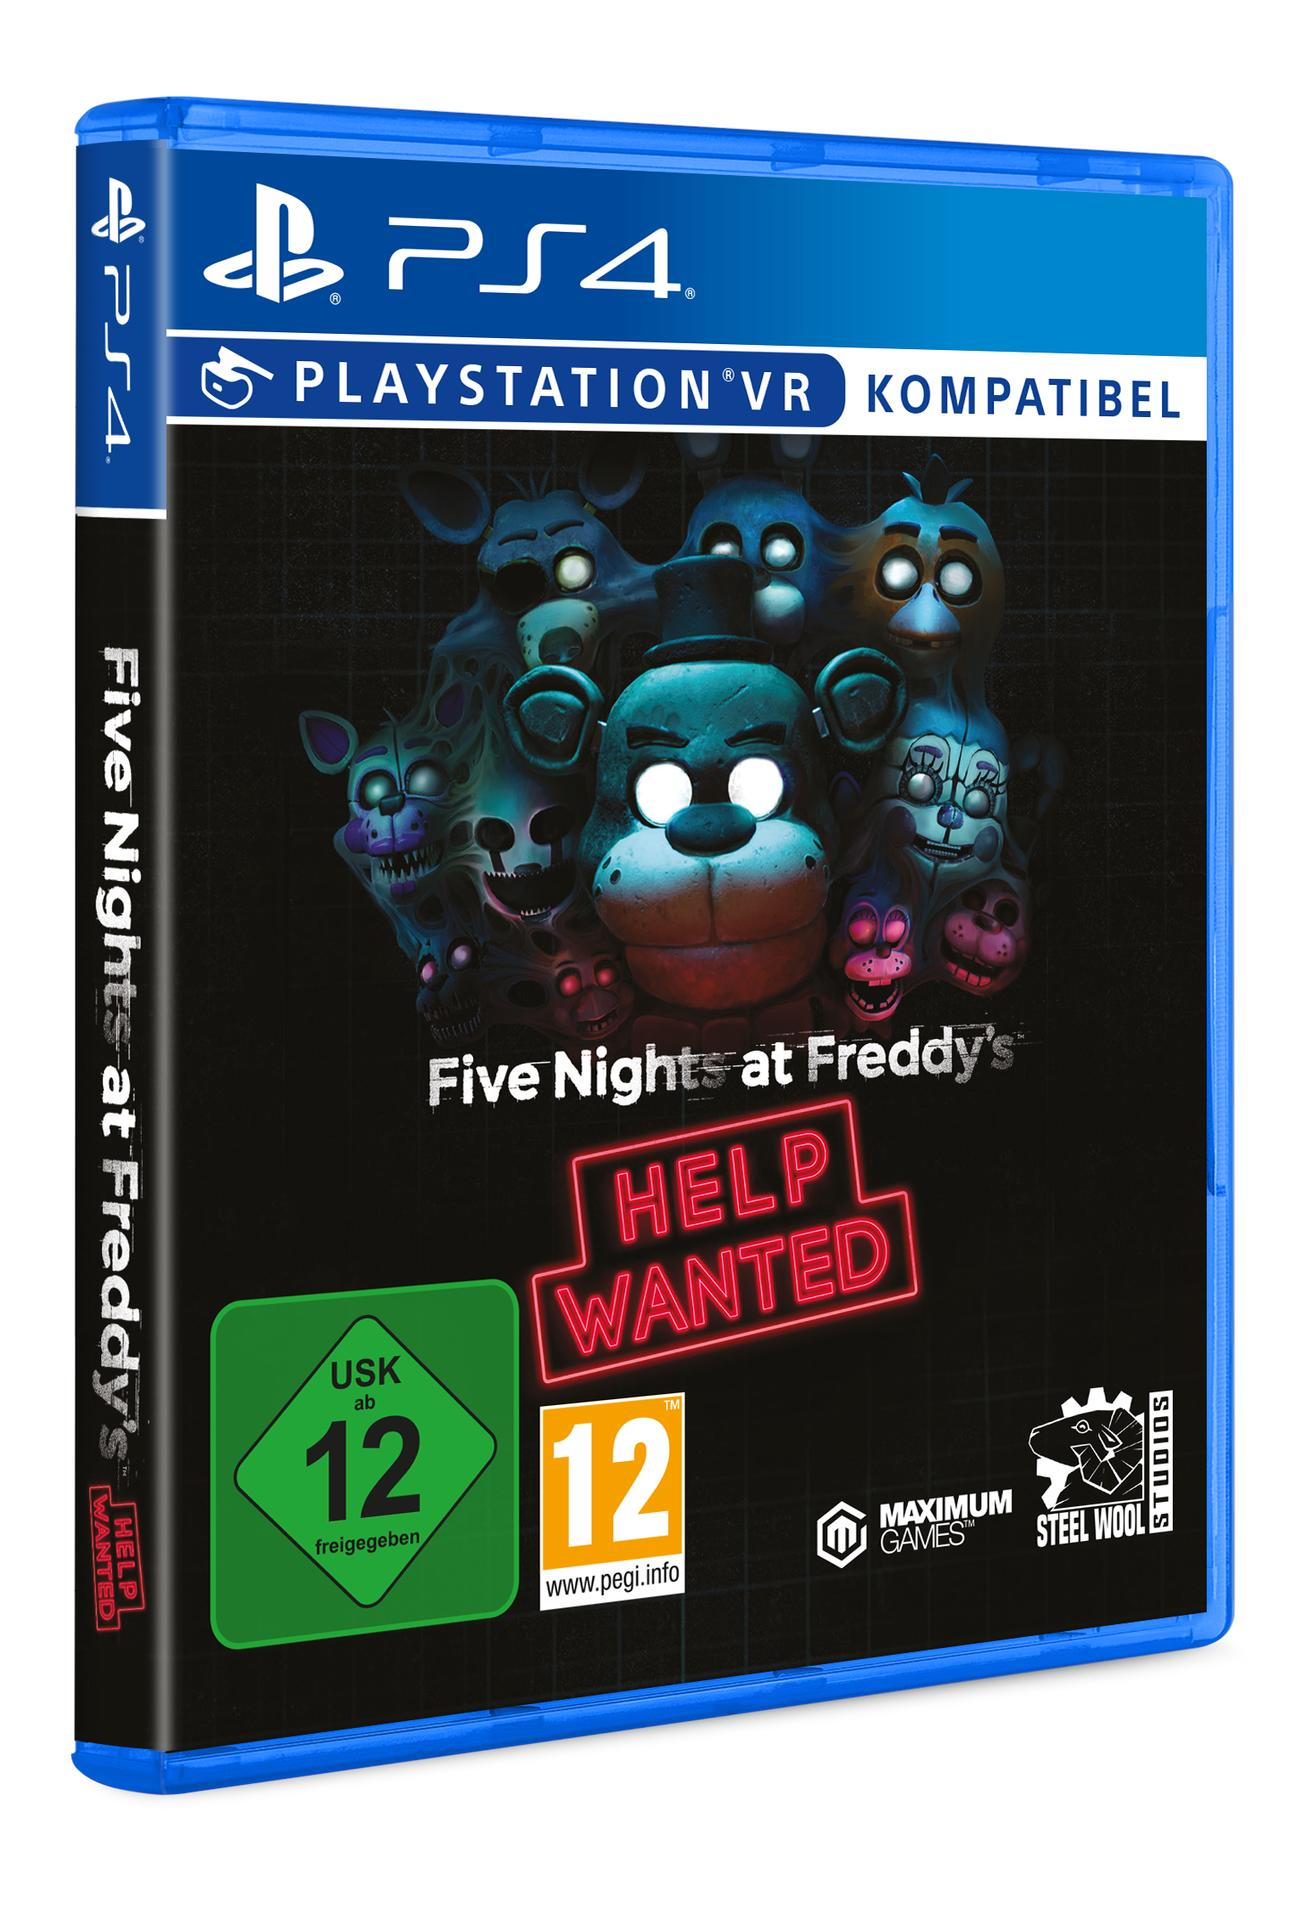 Wanted 4] [PlayStation - at Freddy\'s: Nights Help Five